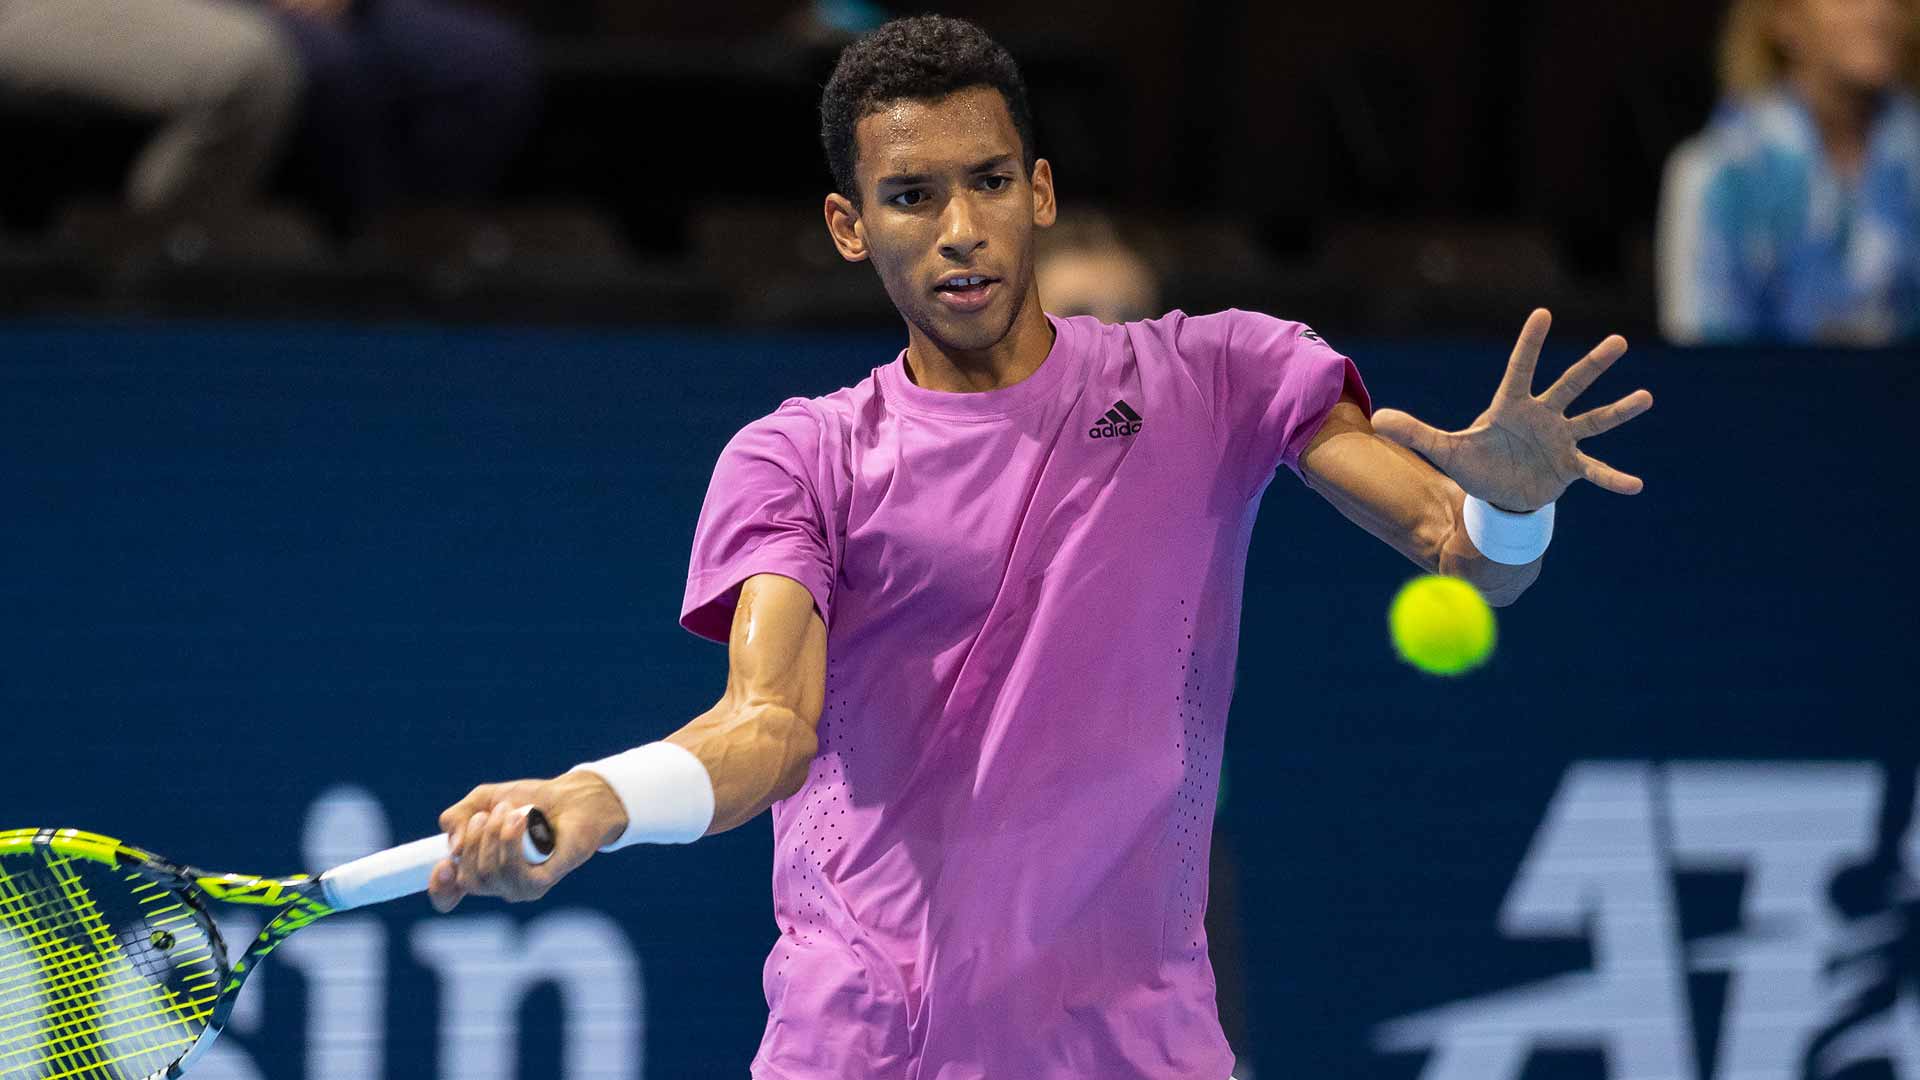 Felix Auger-Aliassime downs Marc Andrea-Huesler in three sets on Wednesday at the Swiss Indoors Basel.